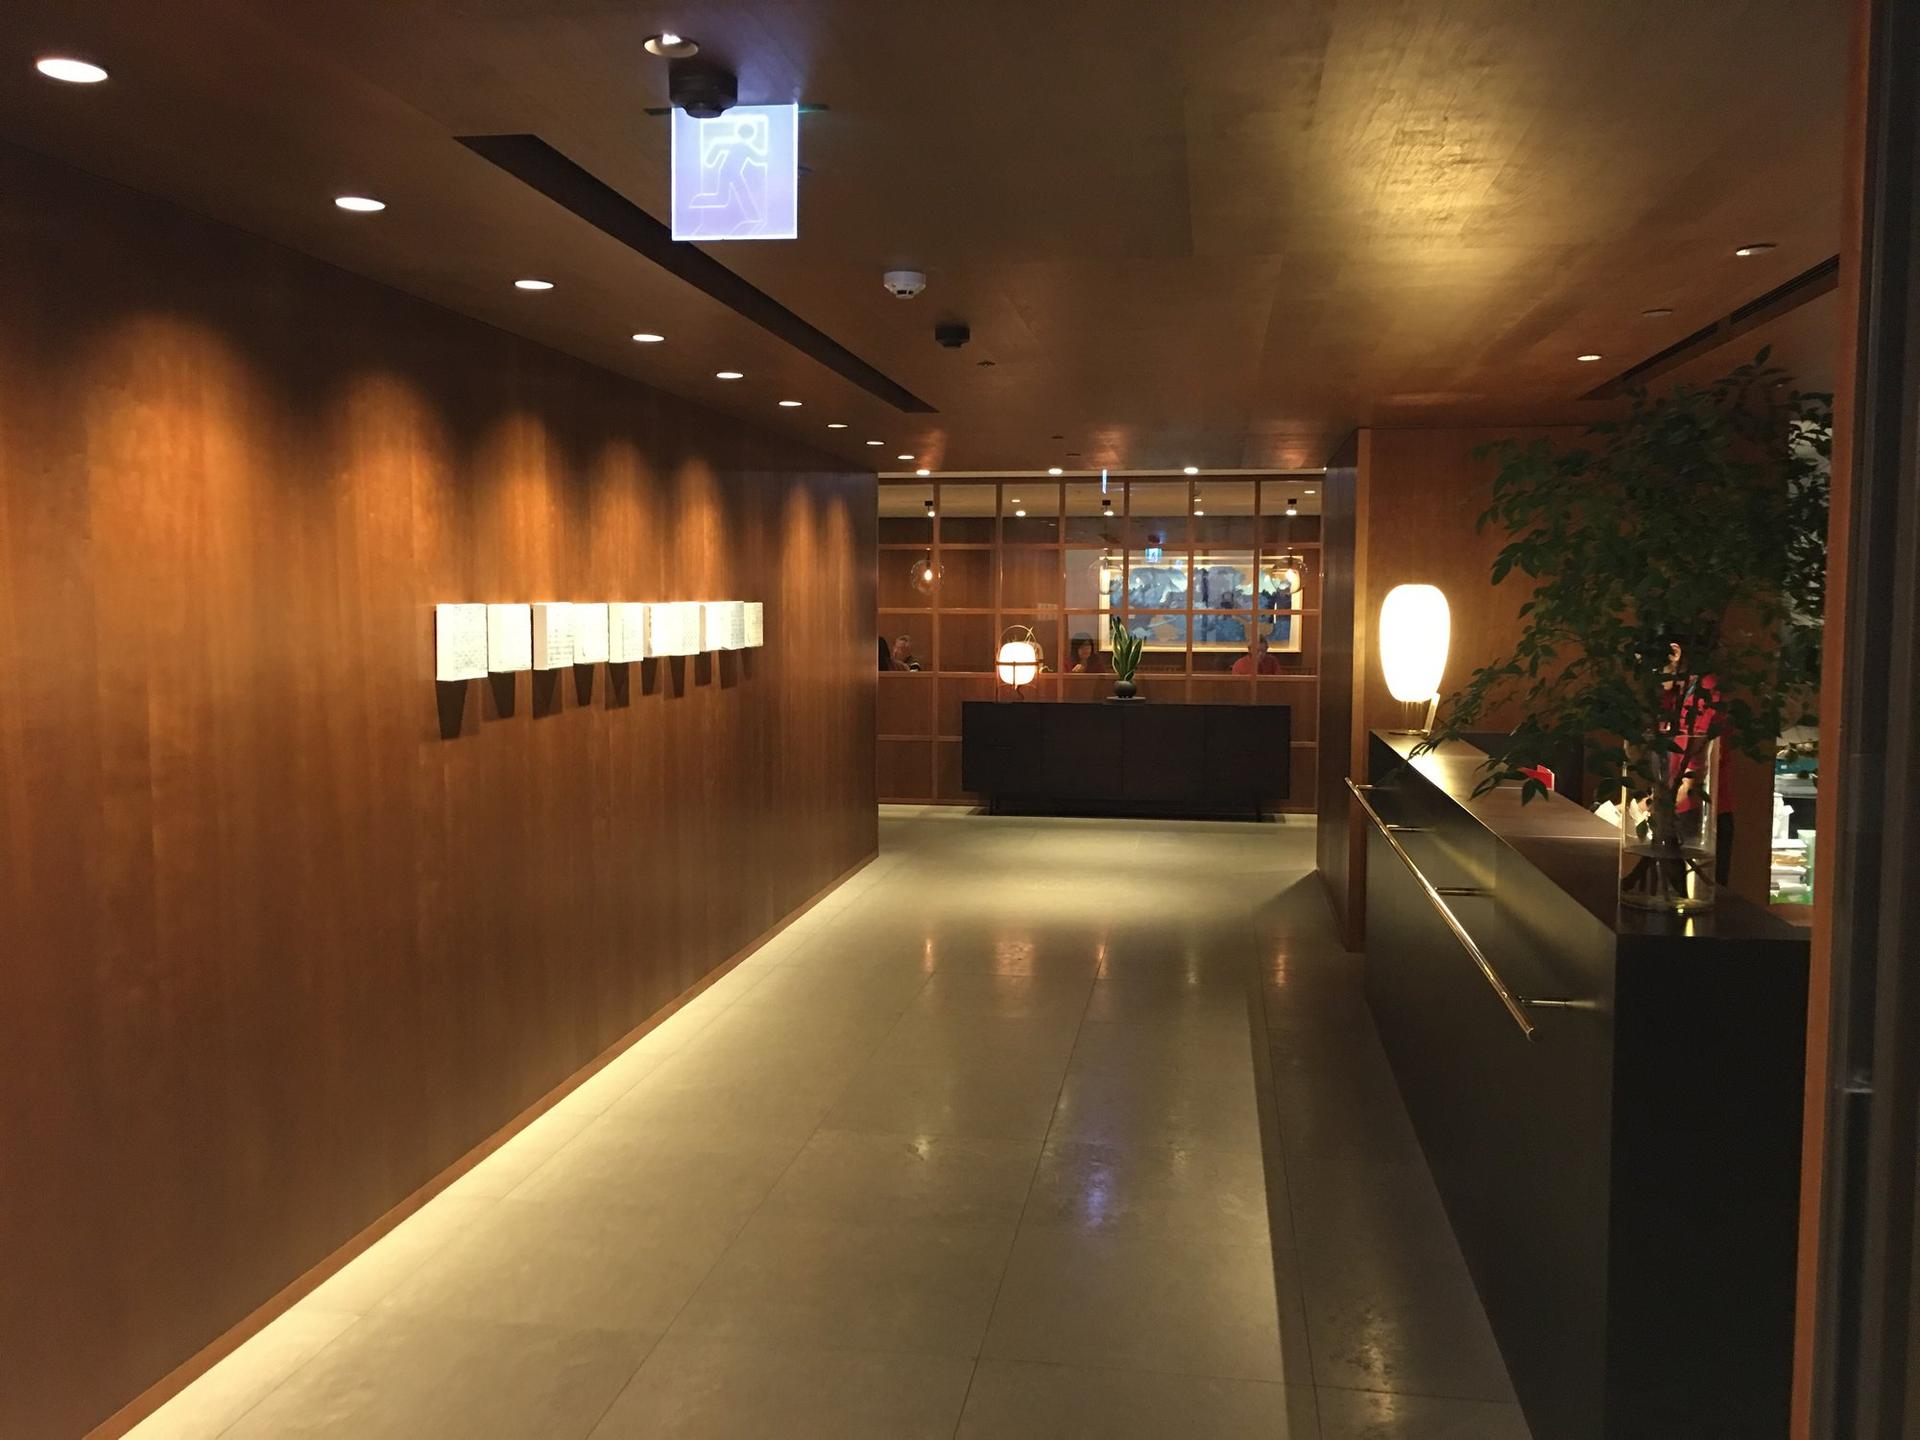 Cathay Pacific Lounge image 19 of 37